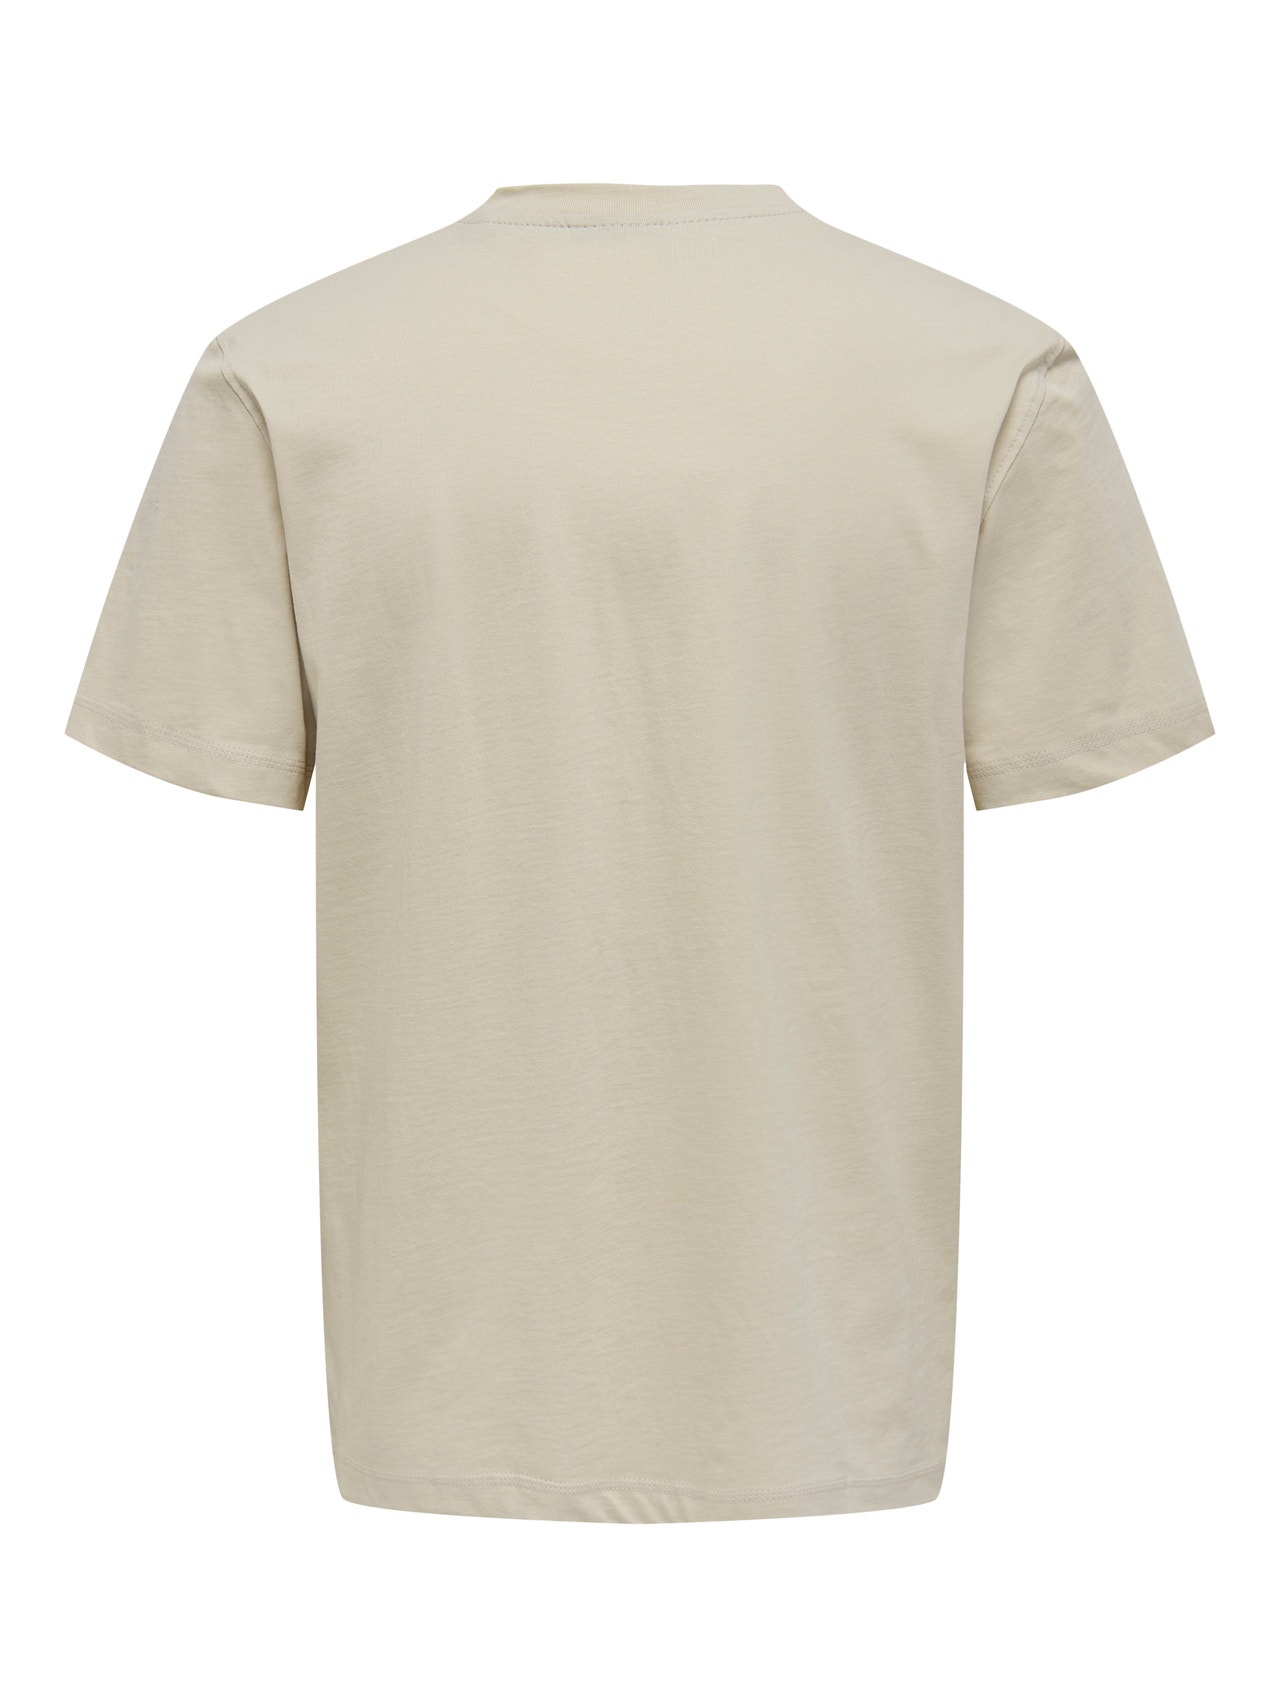 ONLY & SONS Regular Fit Round Neck T-Shirt -Pelican - 22025208